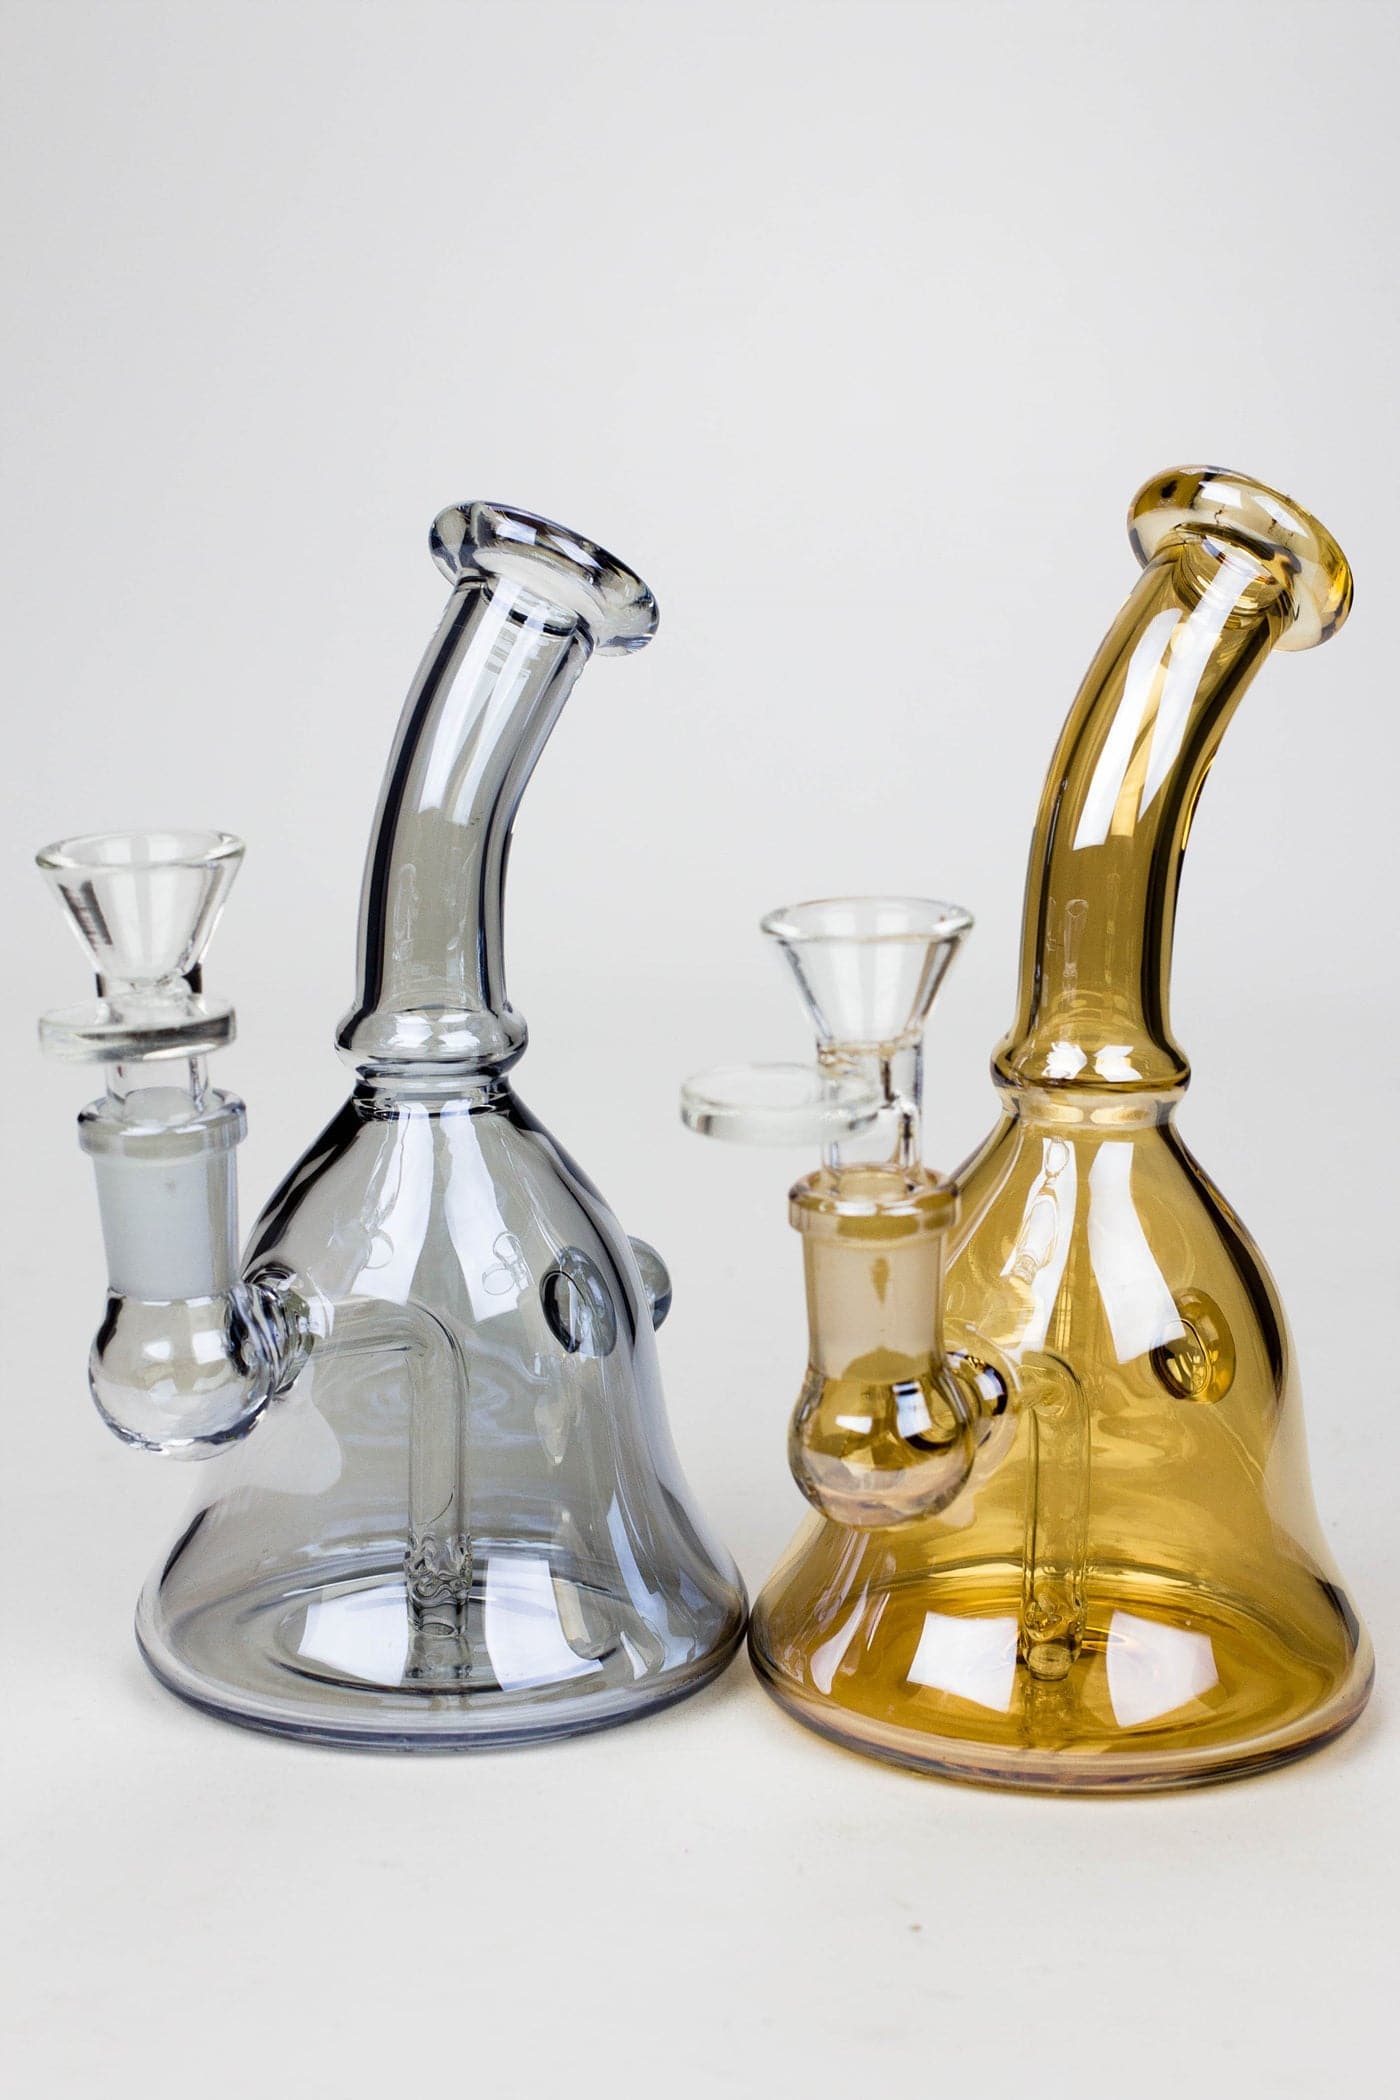 Fixed hole diffuser bell metallic tinted bubbler_0